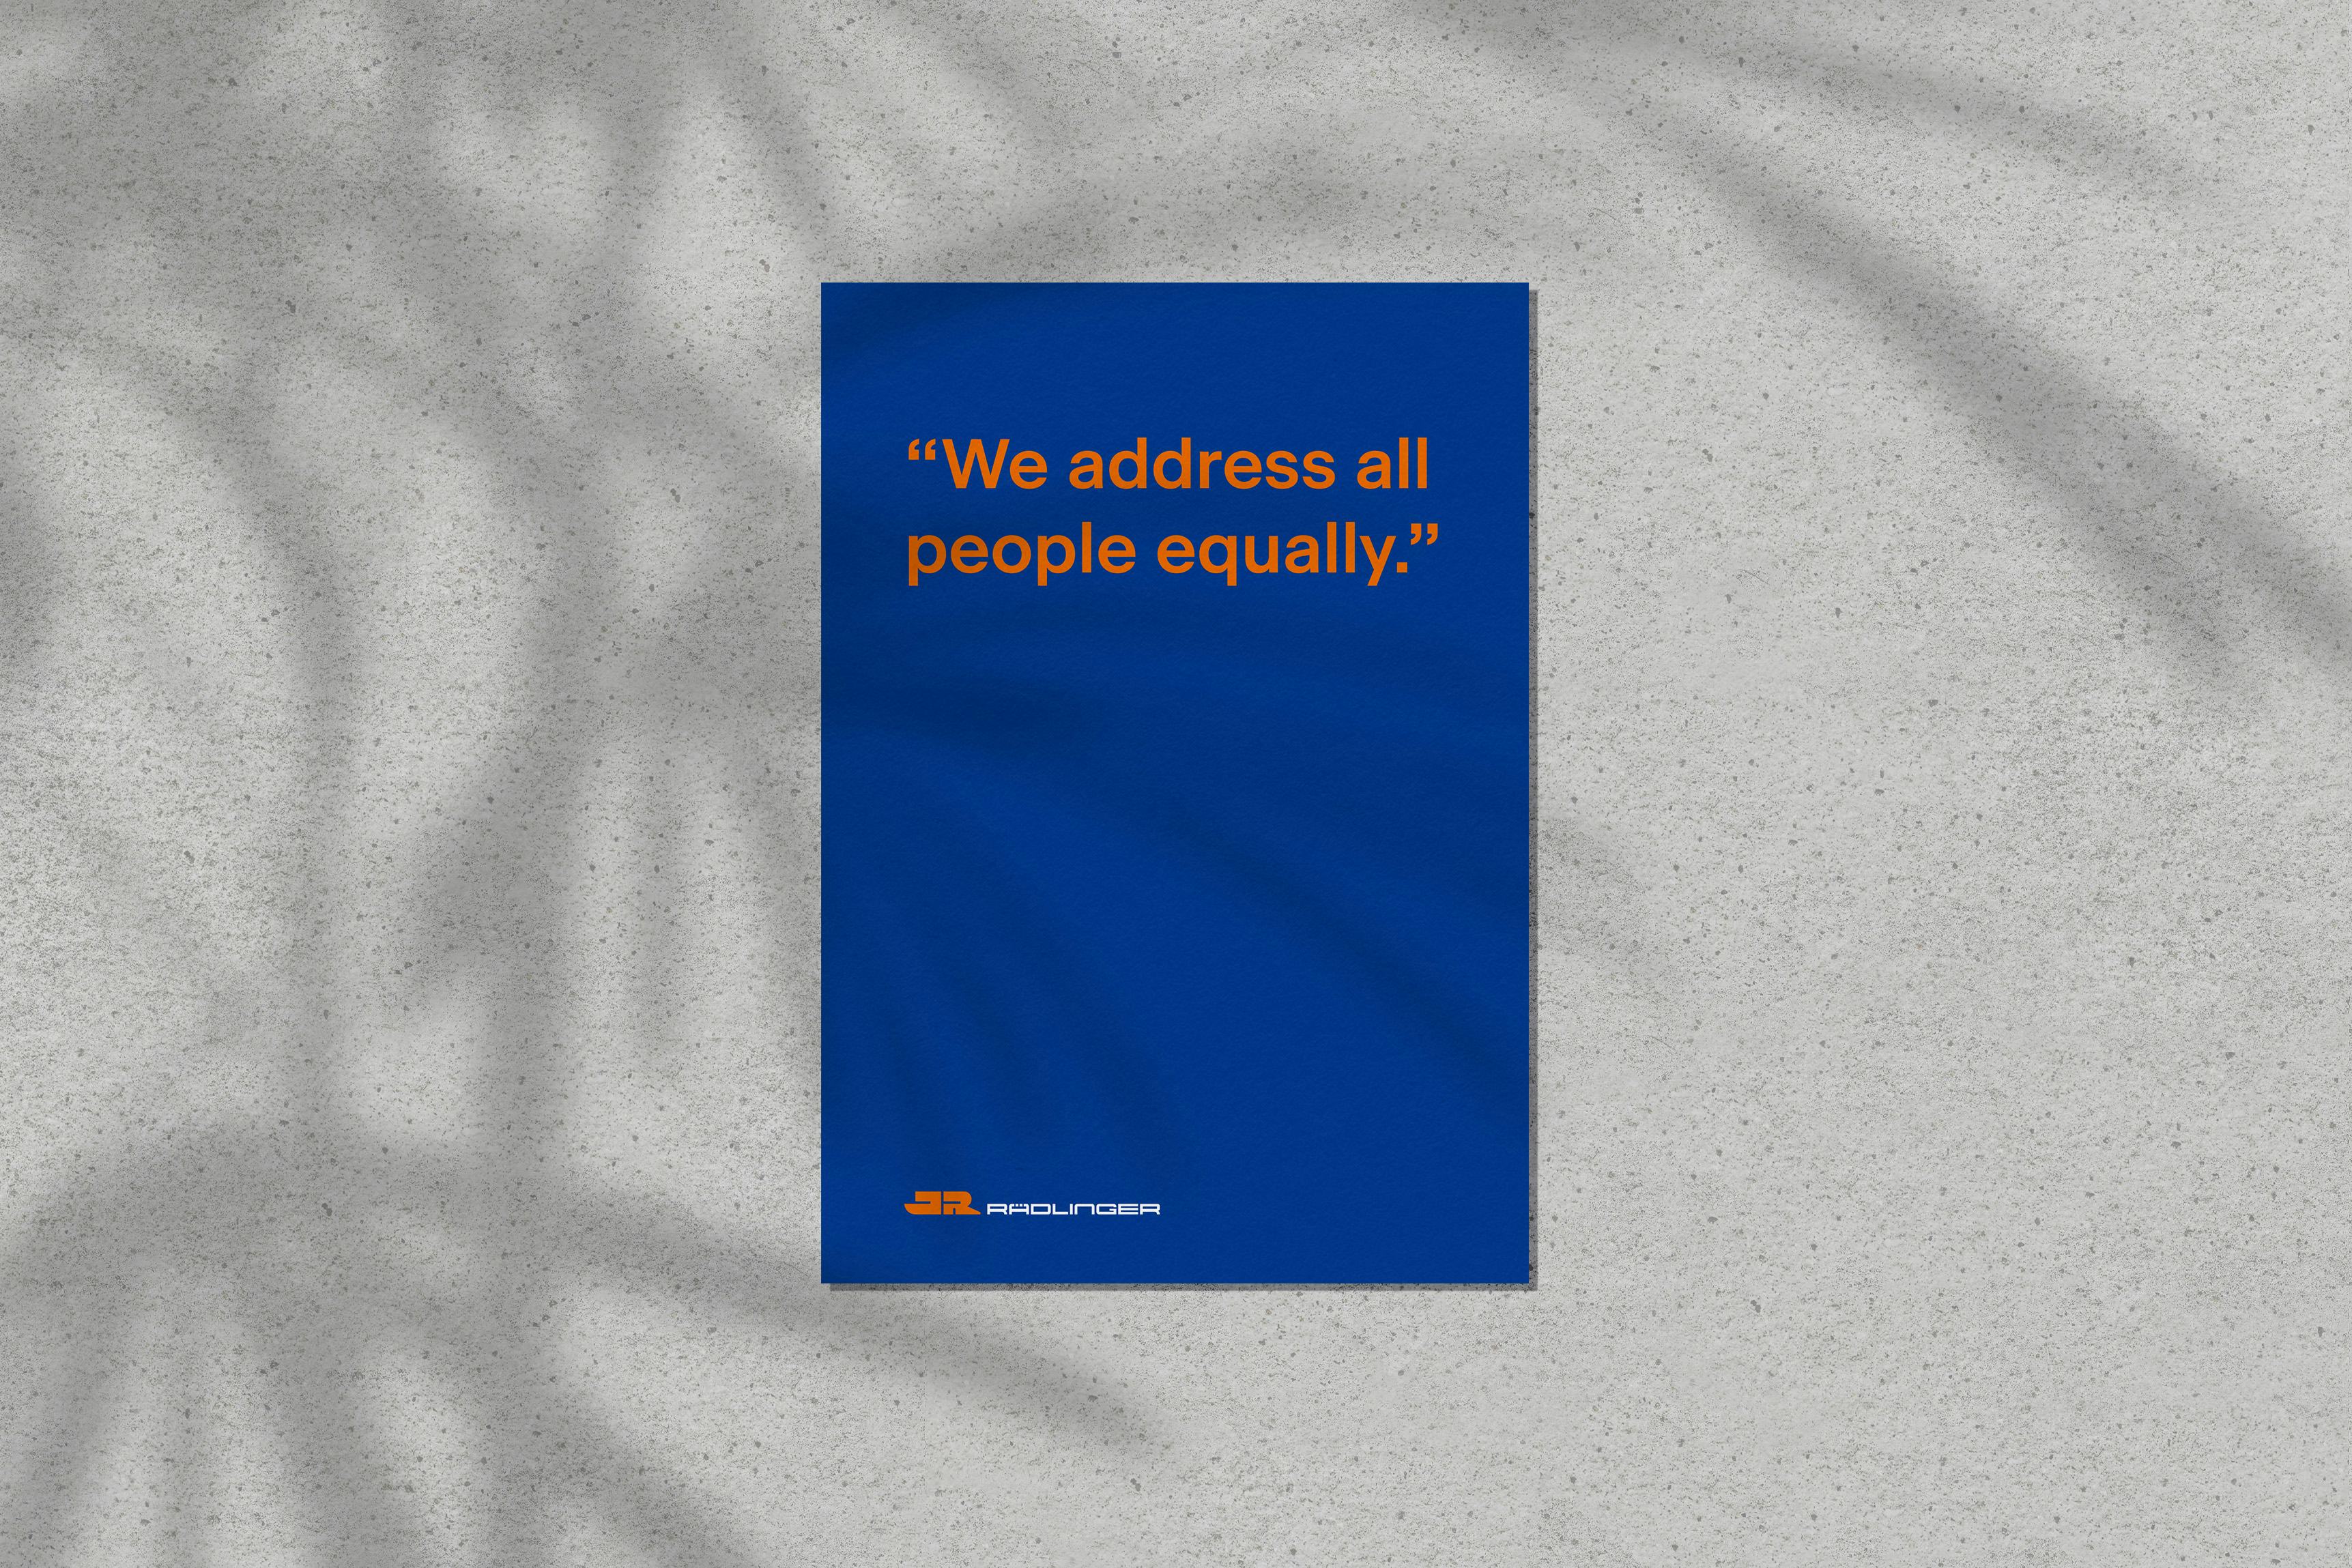 Blue sheet of paper on which is written in orange lettering, "We address all people equally."